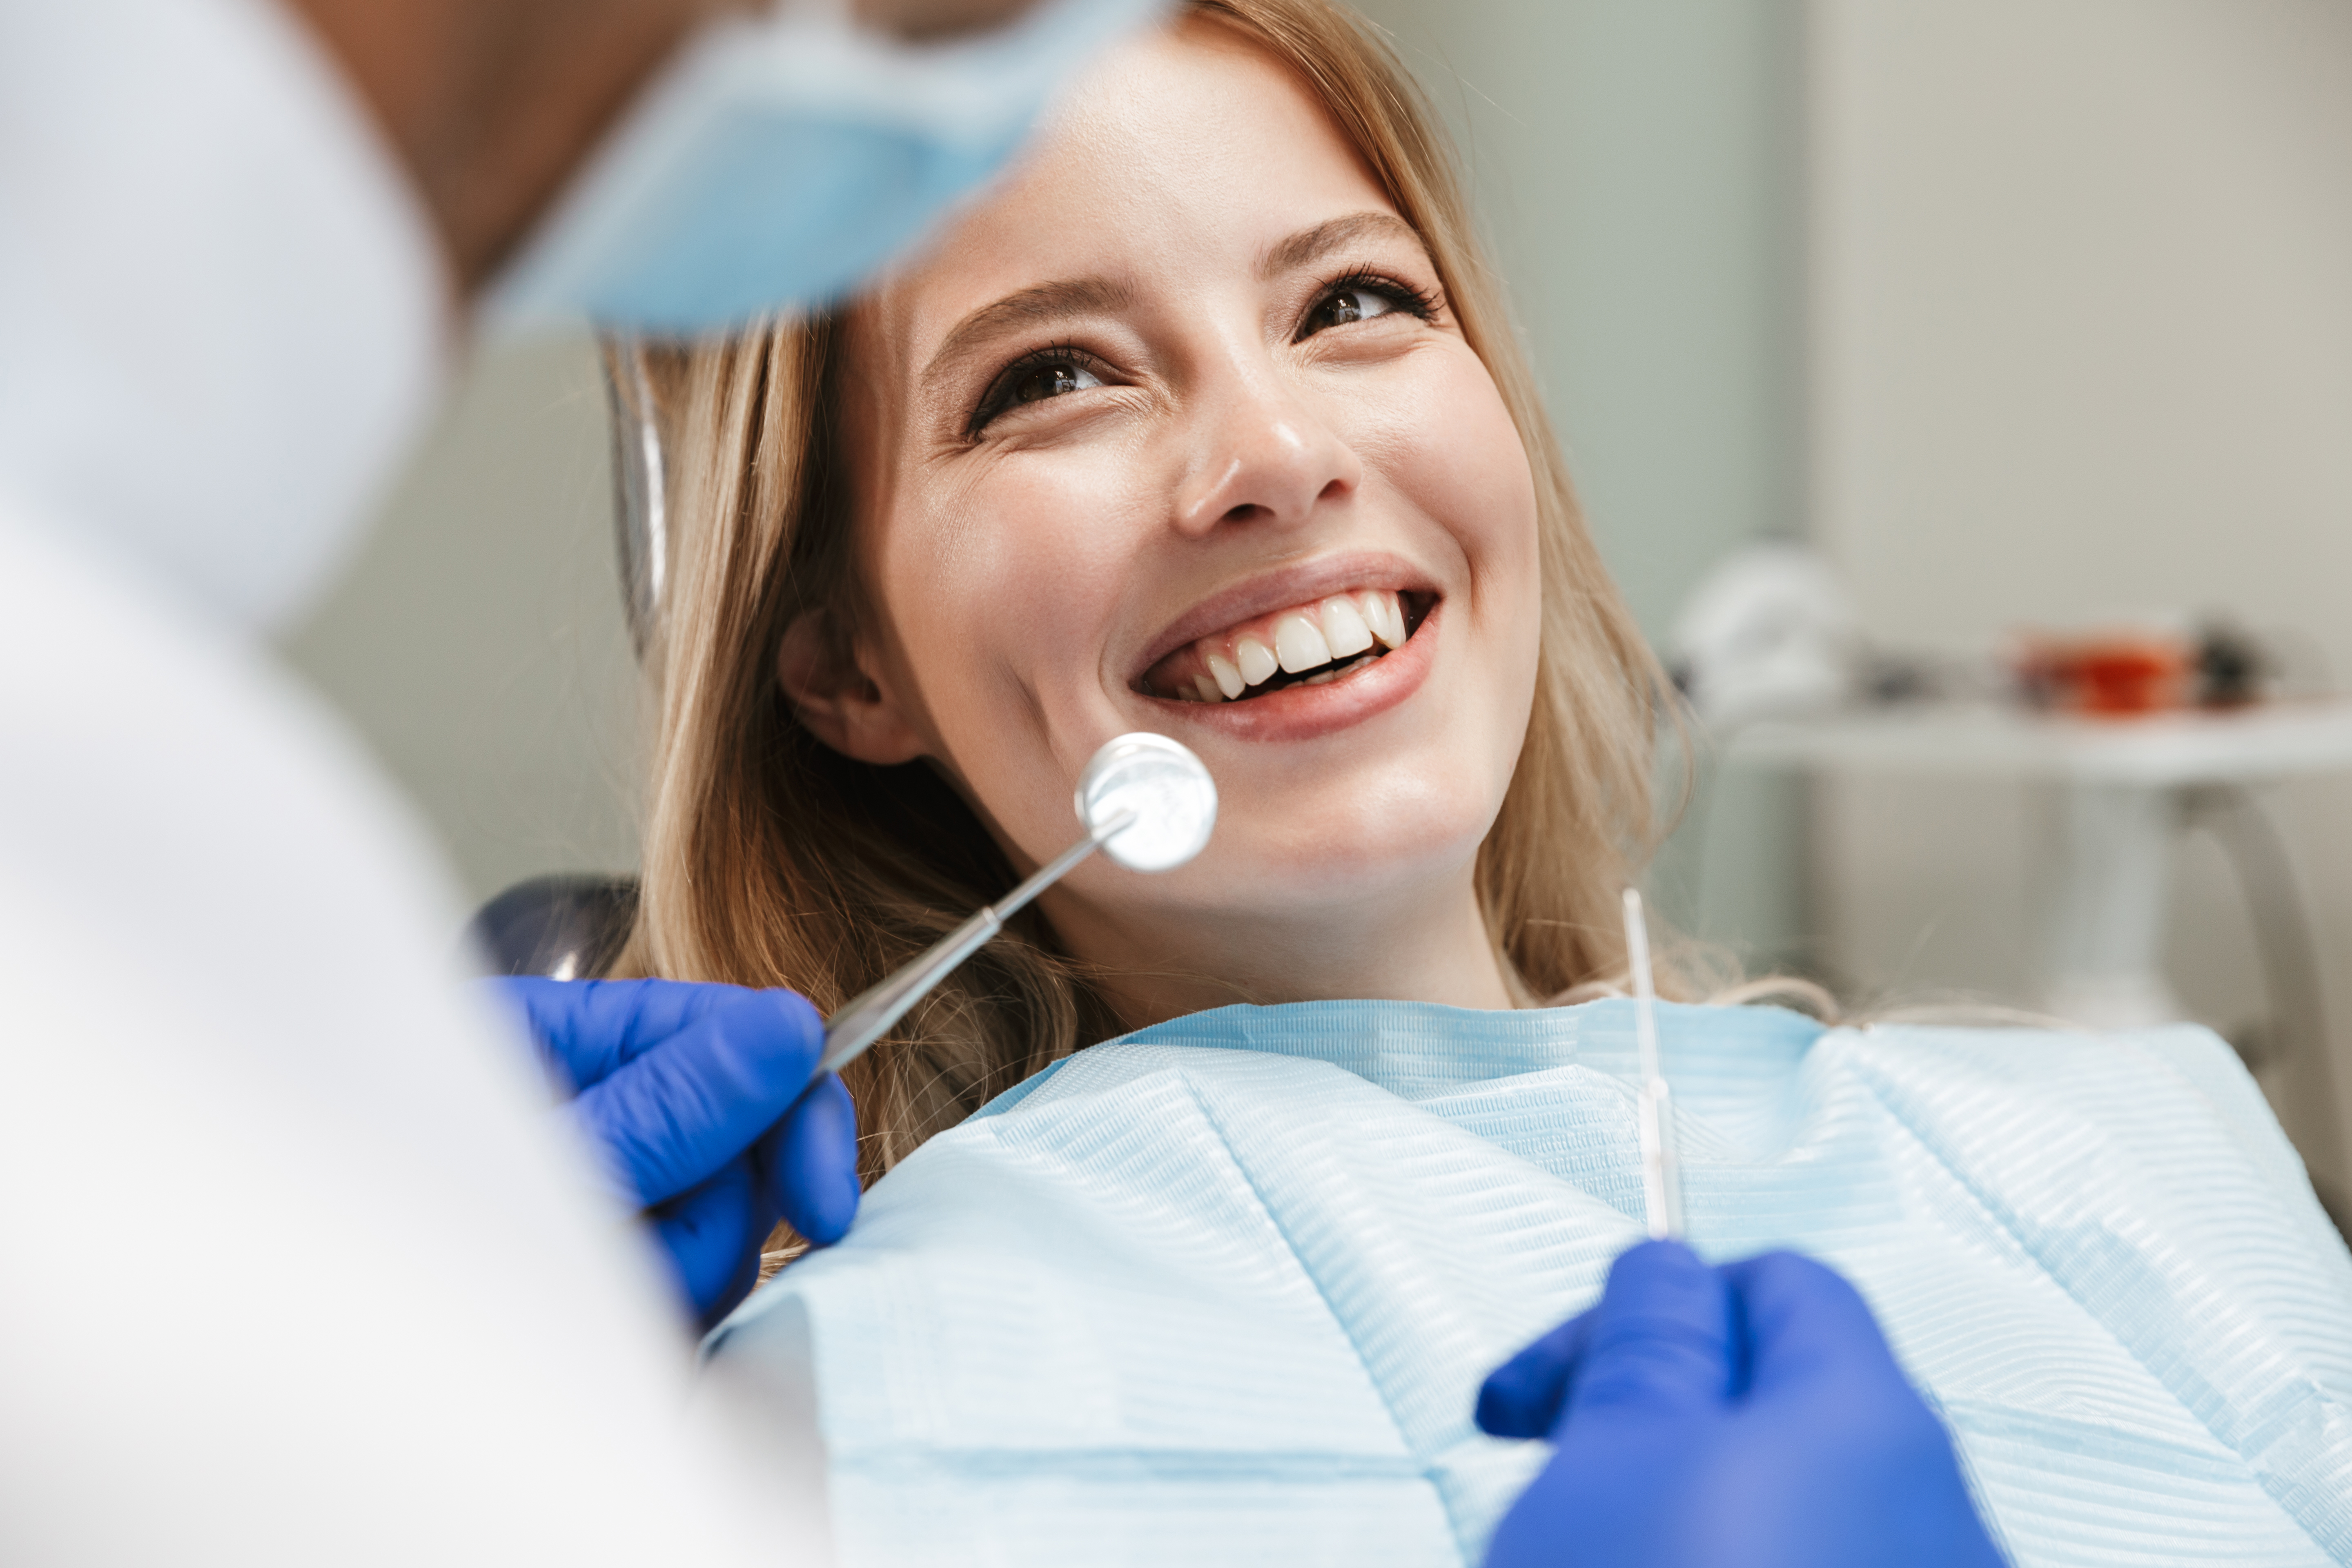 How to know if you need a root canal